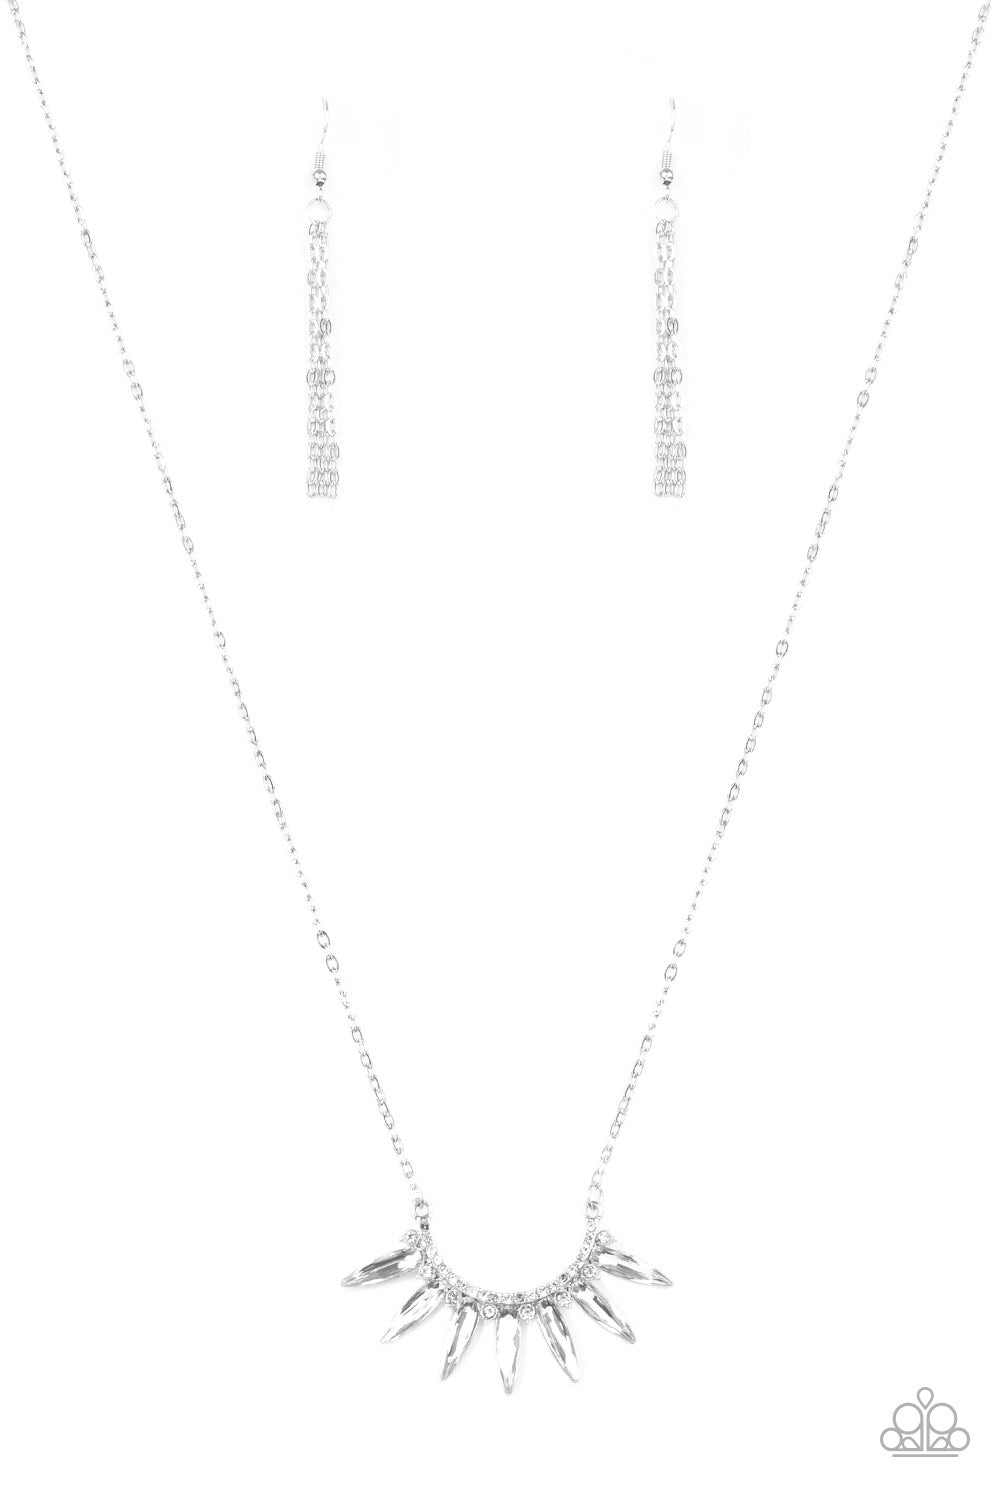 Empirical Elegance Paparazzi Accessories Necklace with Earrings